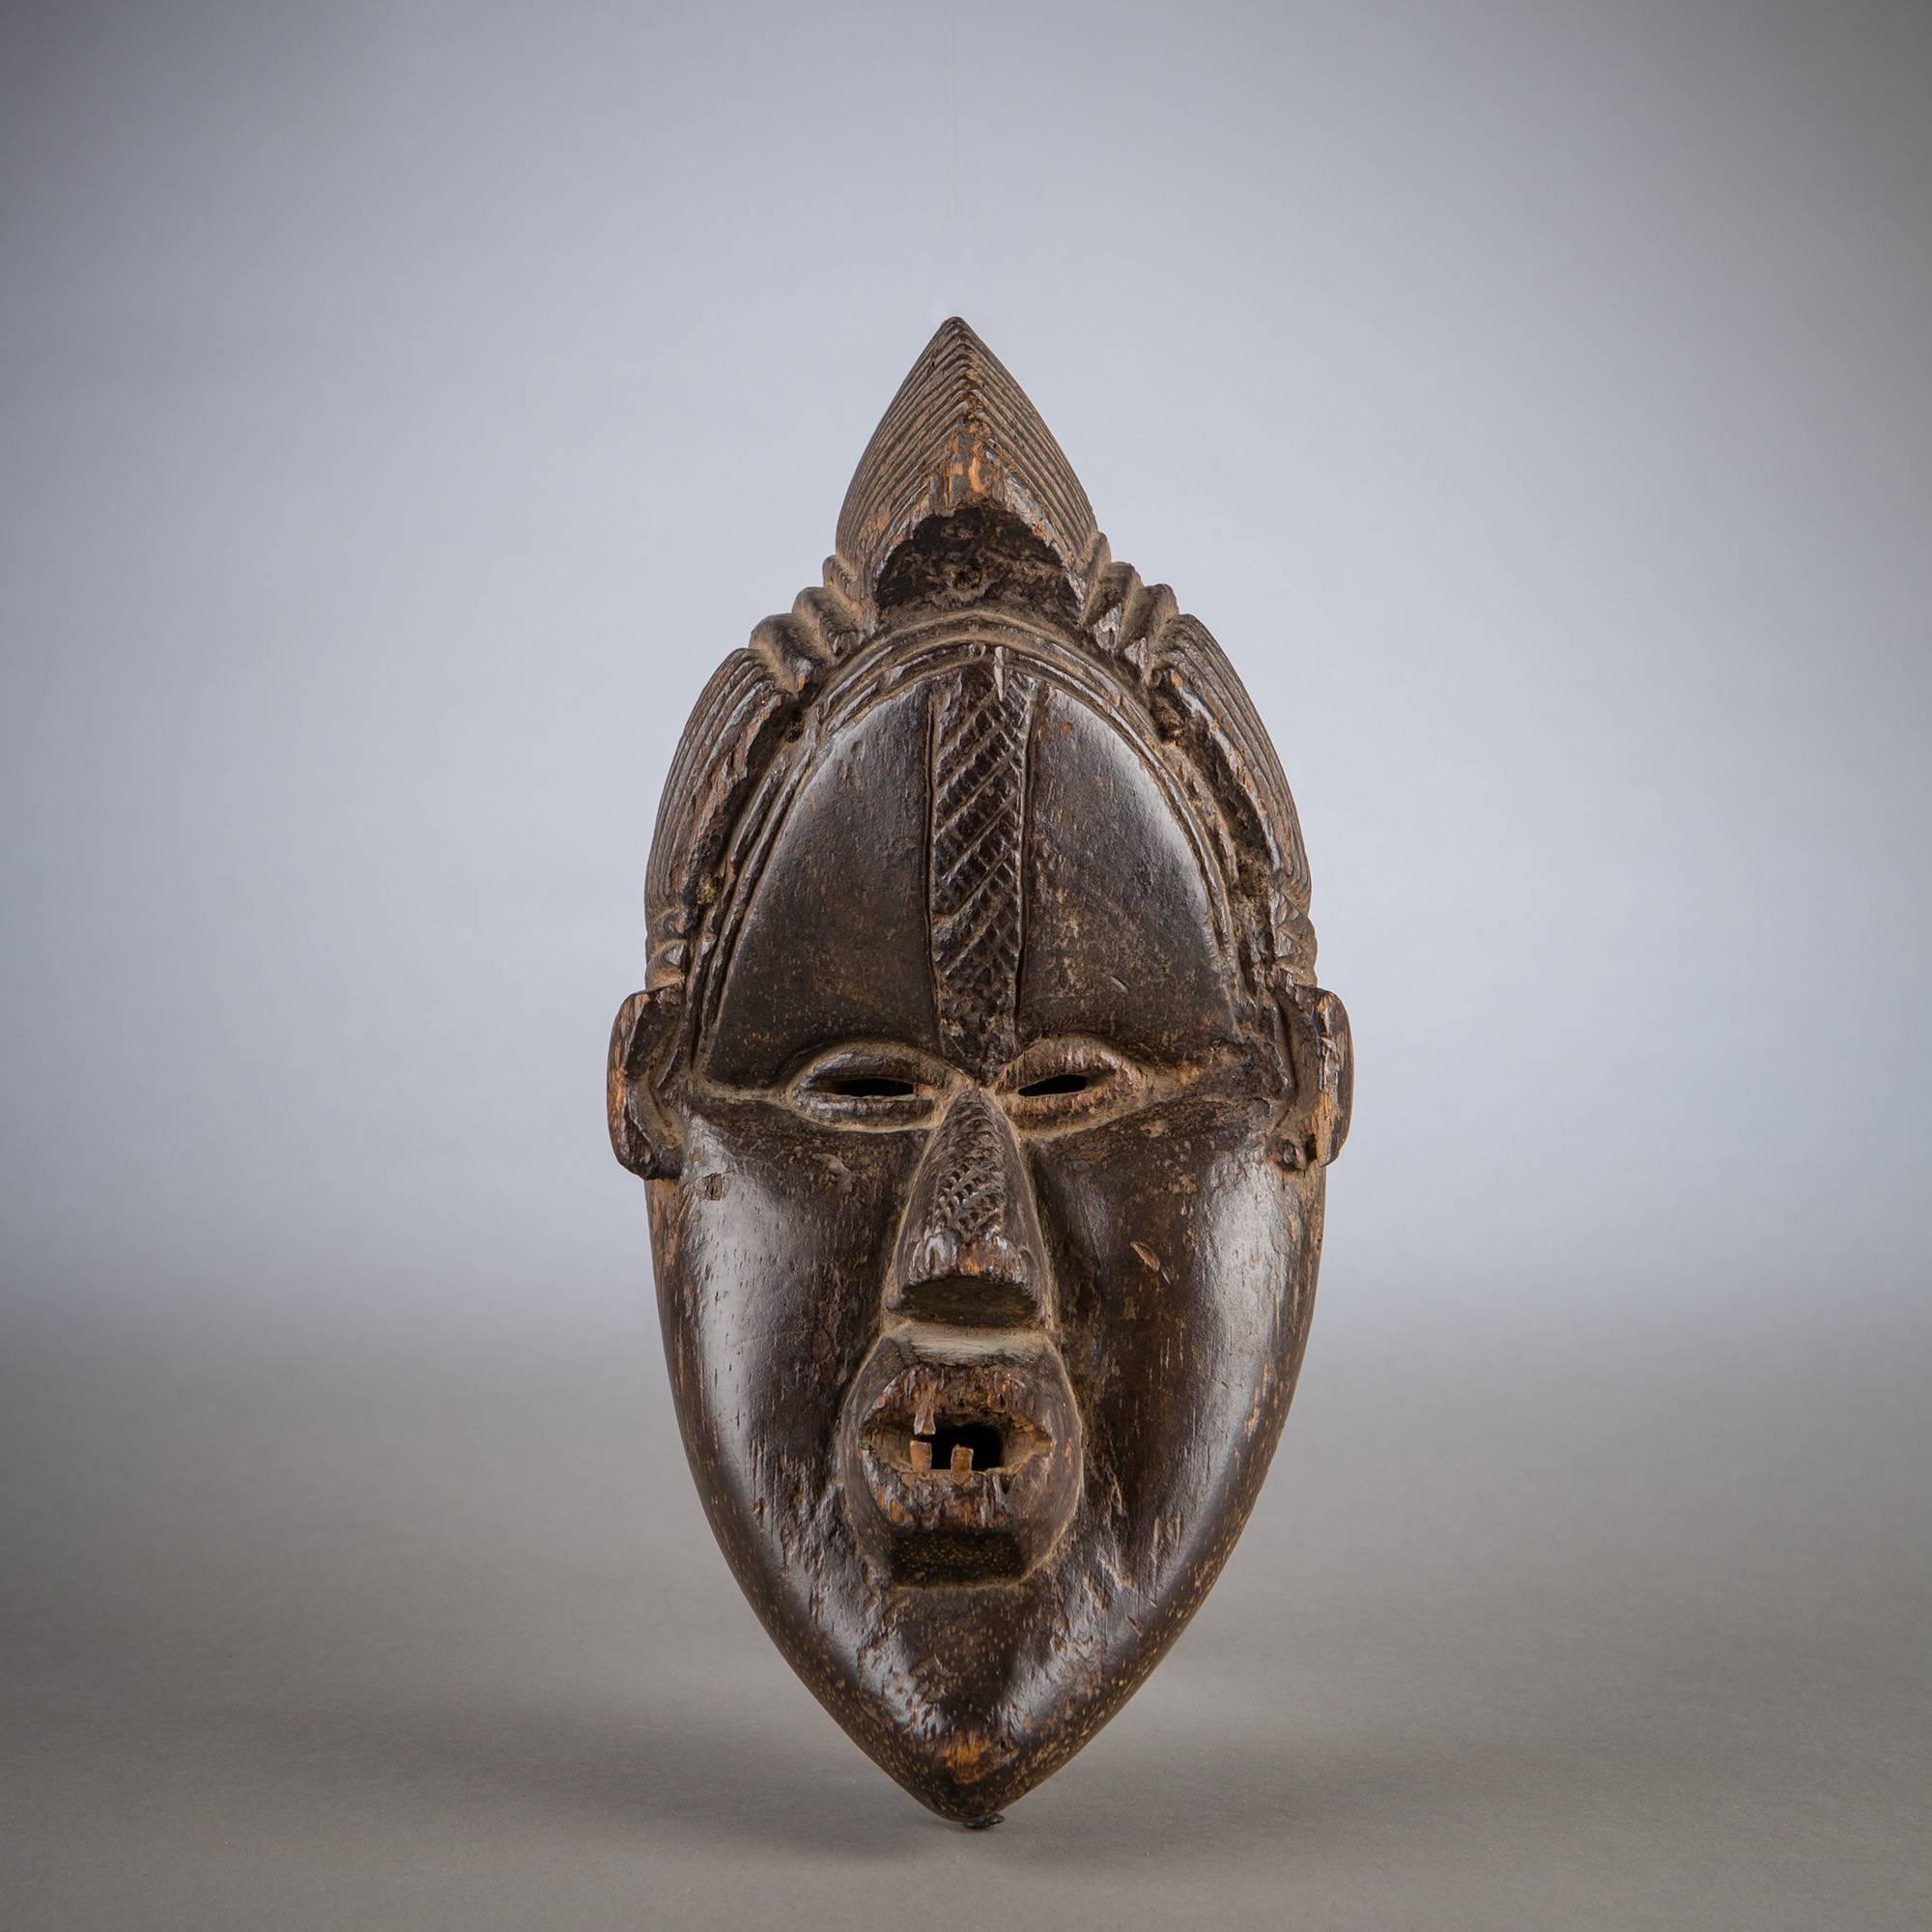 A great sense of mass imbues this Bassa mask, imposing with its classically large brow, full cheeks, and heavy, almond-shaped silhouette. As the face sinks forcefully in at the eyes, the nose and brow are projected dramatically outward, along with